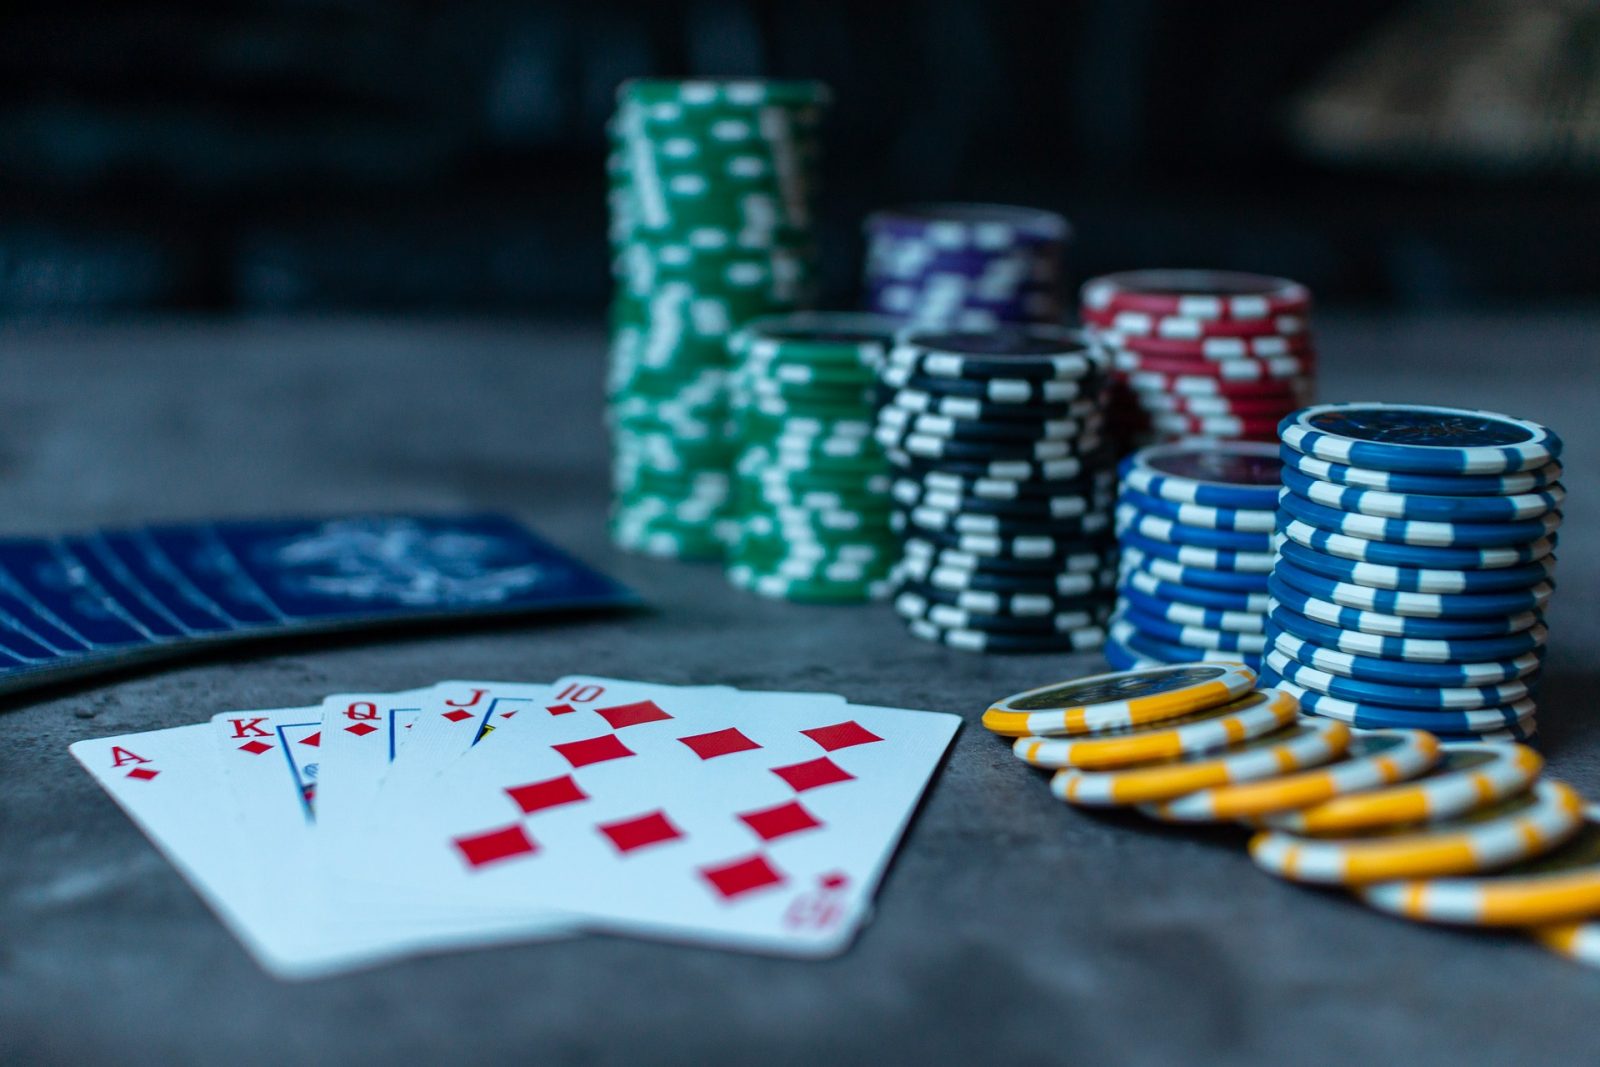 Poker chips - image by Markus Schwedt from Pixabay